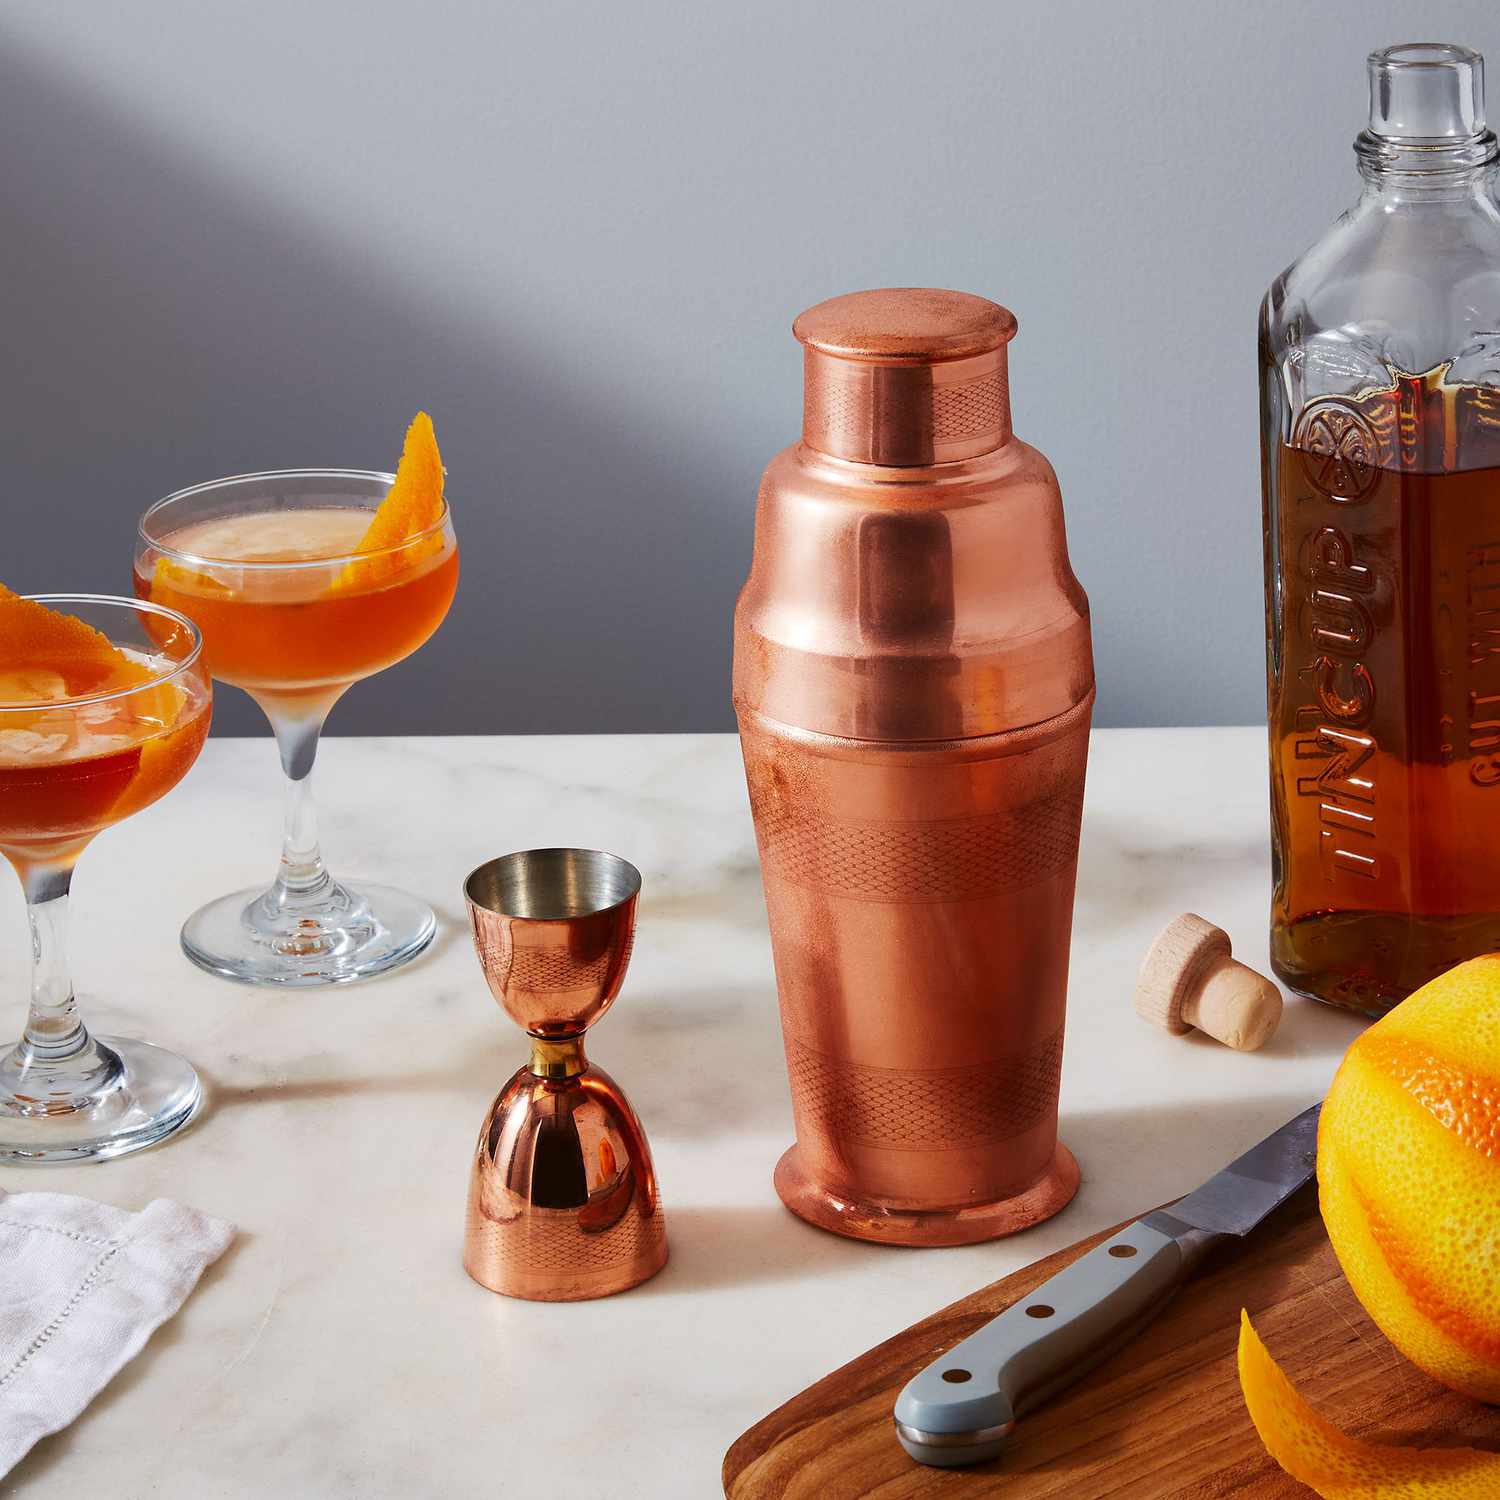 Coppermill Kitchen Vintage-Inspired Copper Cocktail Shaker & Jigger